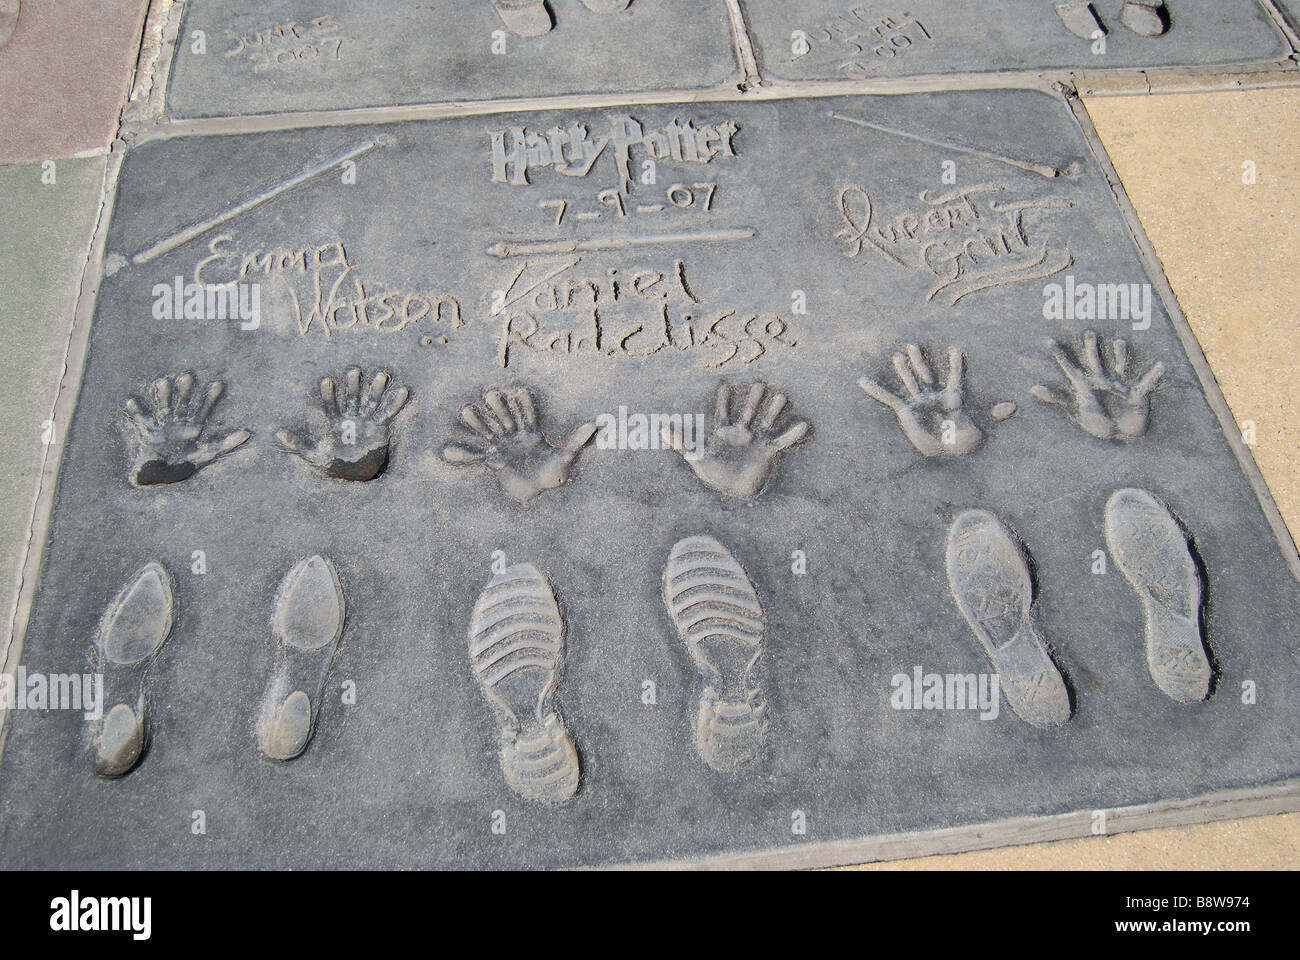 Harry Potter star stampe, TCL Chinese Theatre, Hollywood Boulevard, Hollywood, Los Angeles, California, Stati Uniti d'America Foto Stock